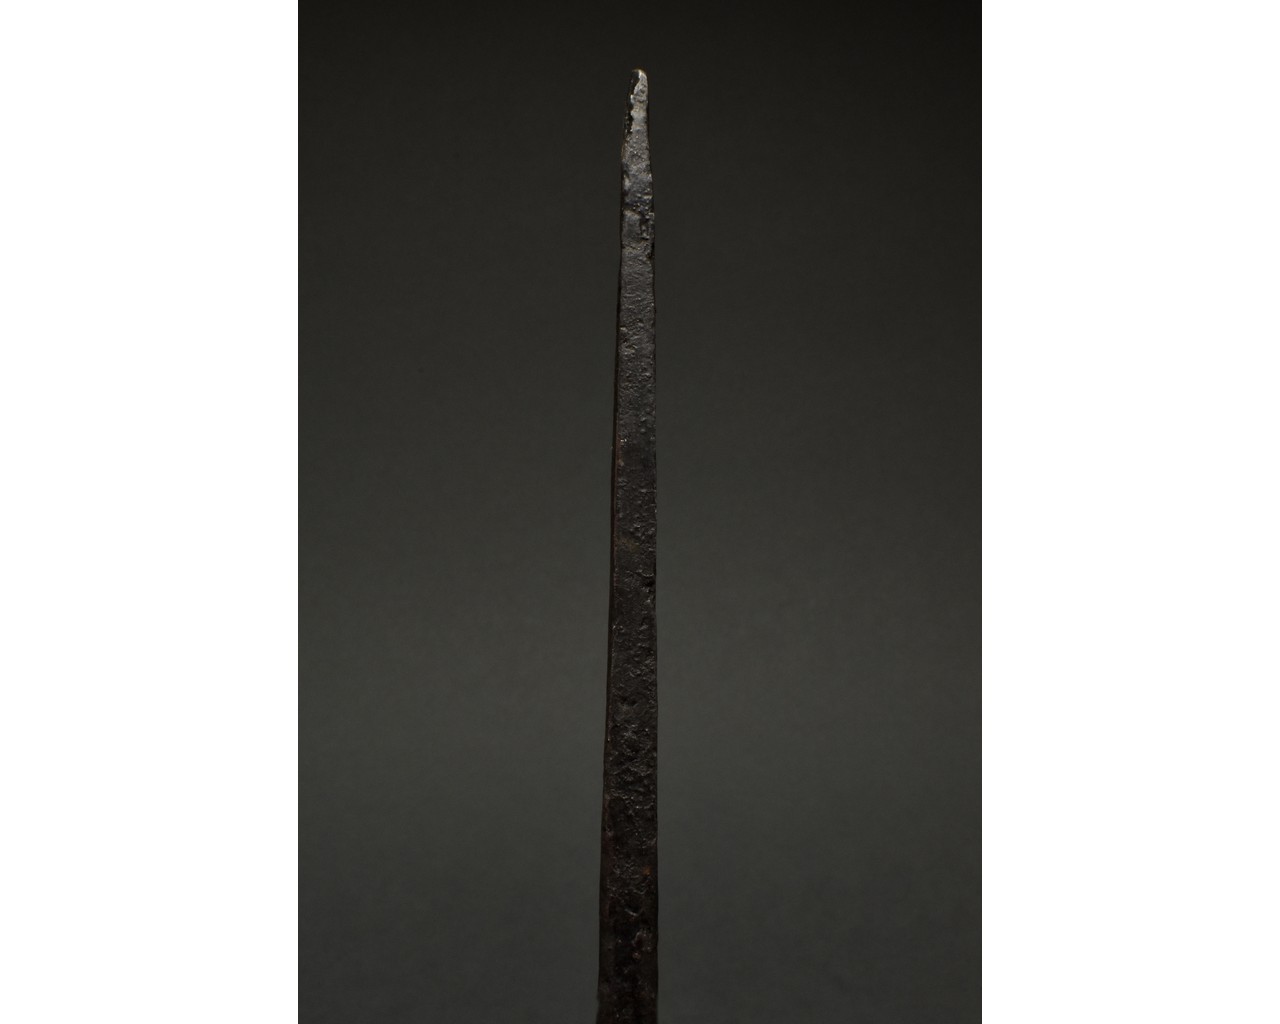 MEDIEVAL VIKING AGE IRON SPEAR HEAD - Image 4 of 4